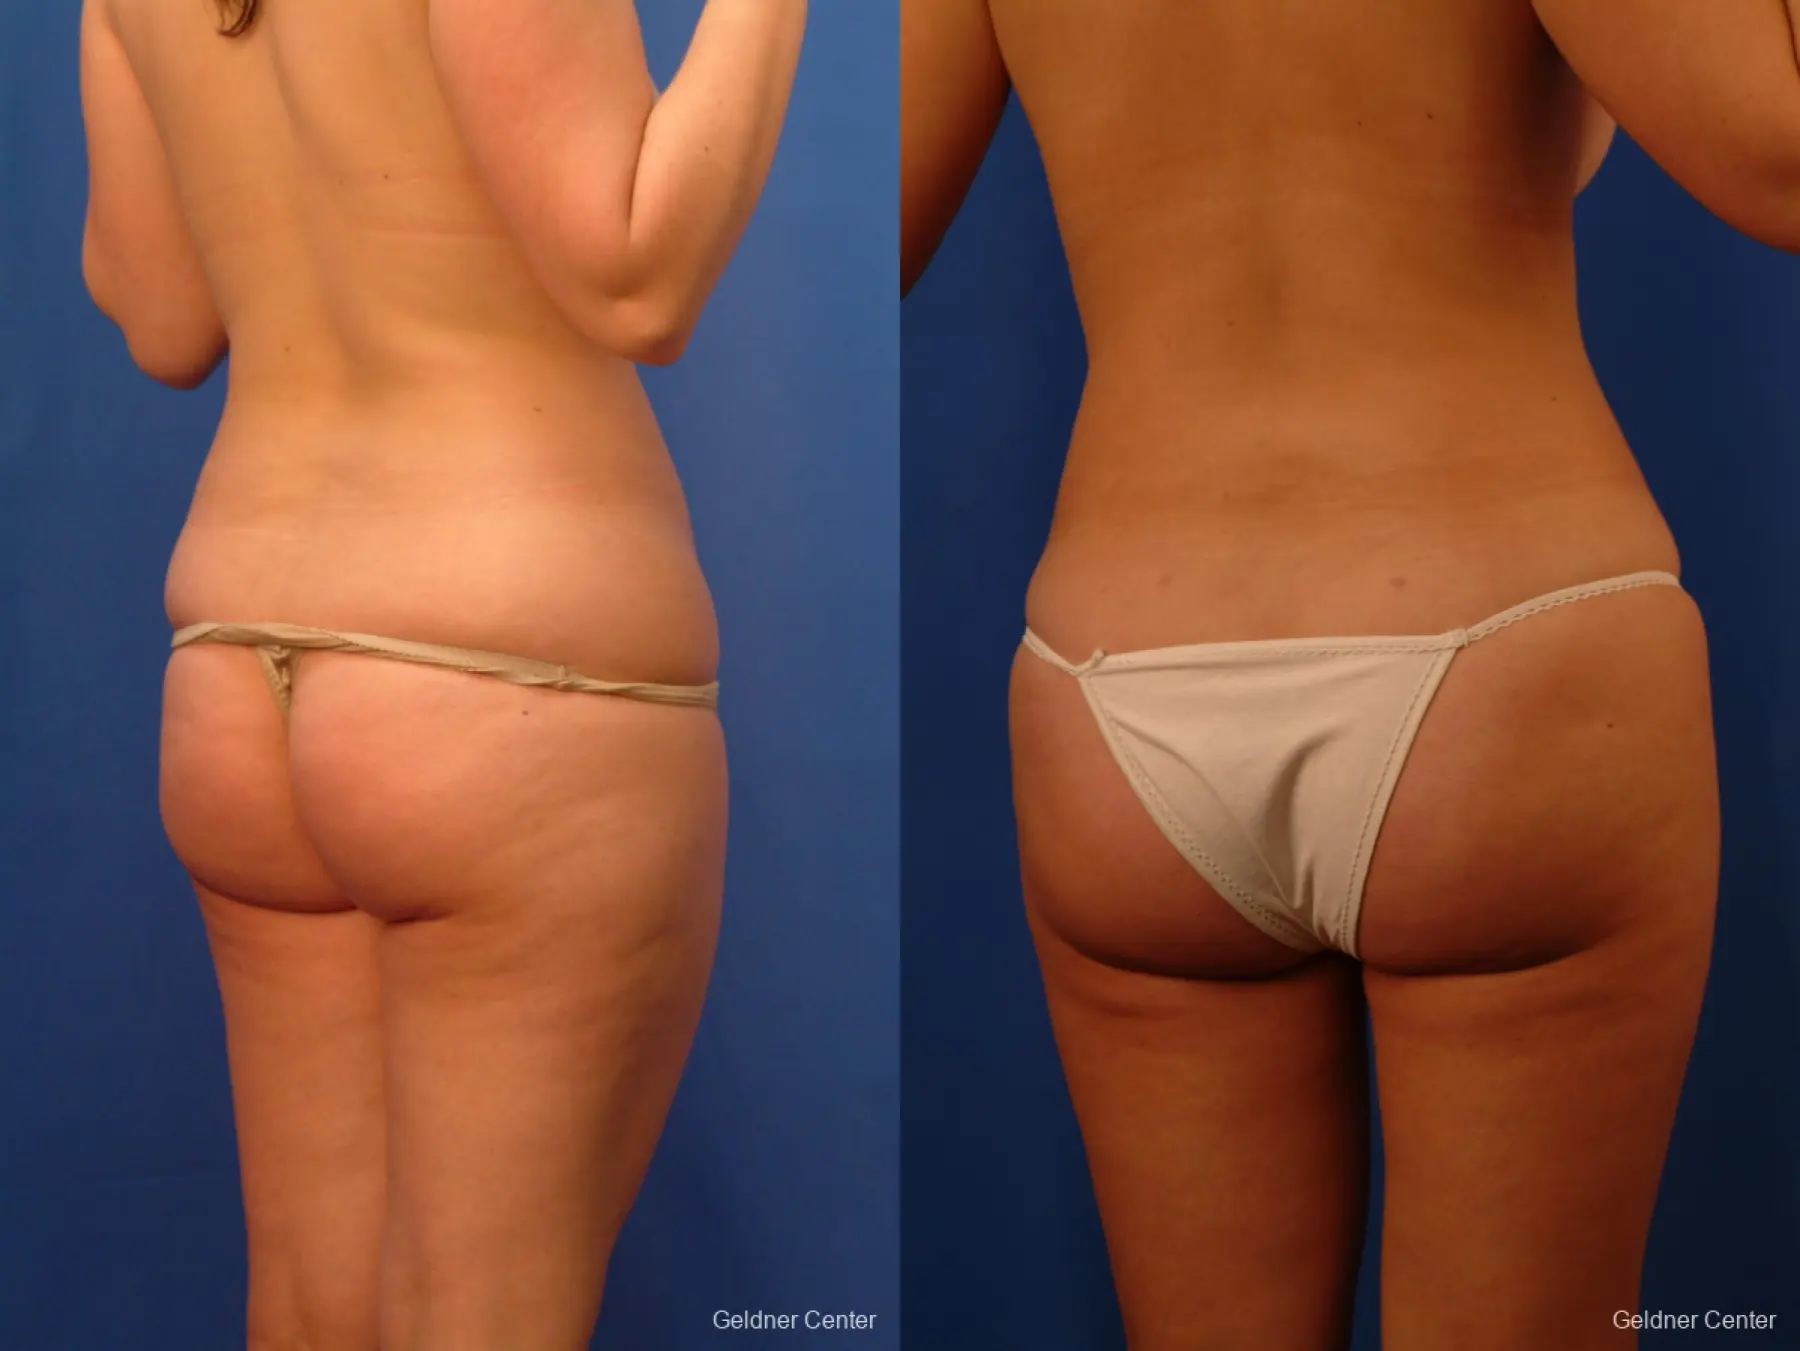 Vaser lipo patient 2516 before and after photos - Before and After 4